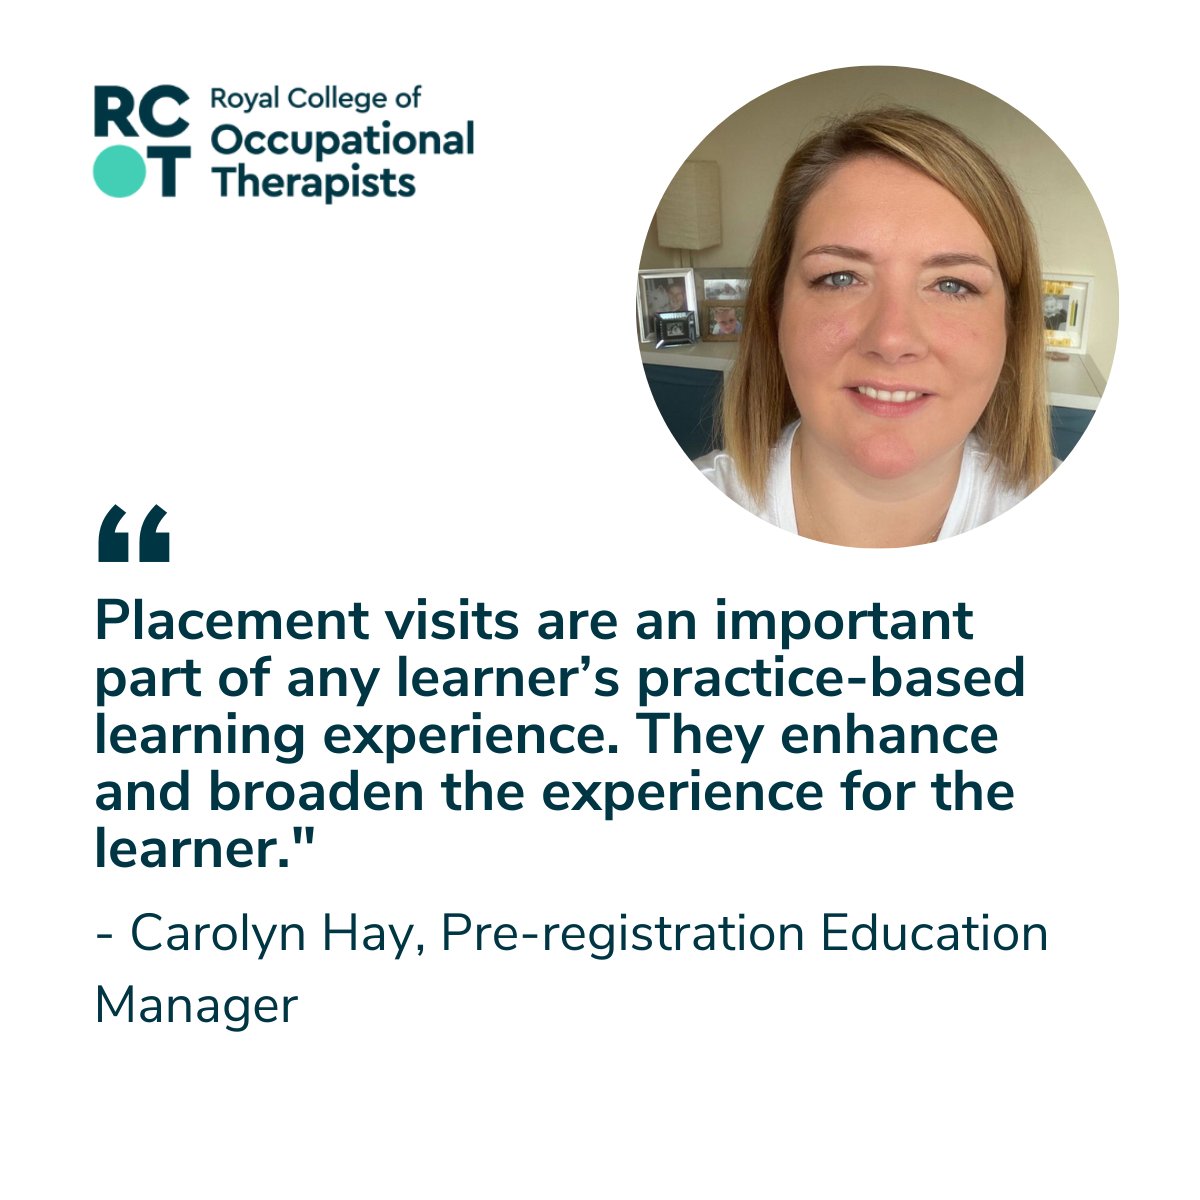 Have you seen our practice-based learning programme? 🤔 The five-week programme supports apprentices and students within non-traditional practice-based learning and will be repeated every two months in 2022. @CarolynHay shares more about the programme: loom.ly/f3XCLcY